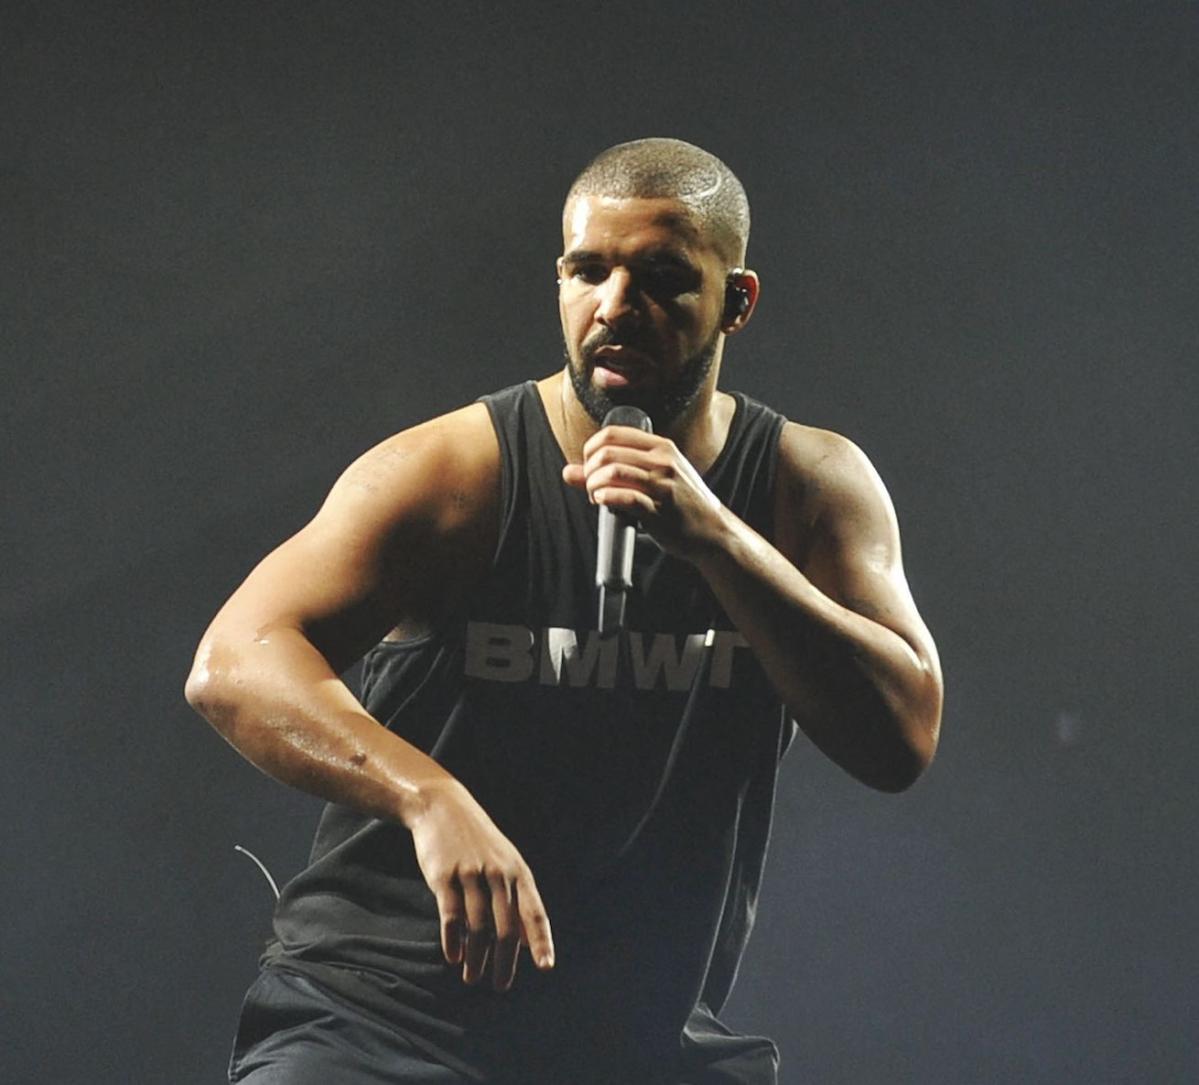 Woman Who Threw Her Size 36G Bra At Drake's Concert Reveals The